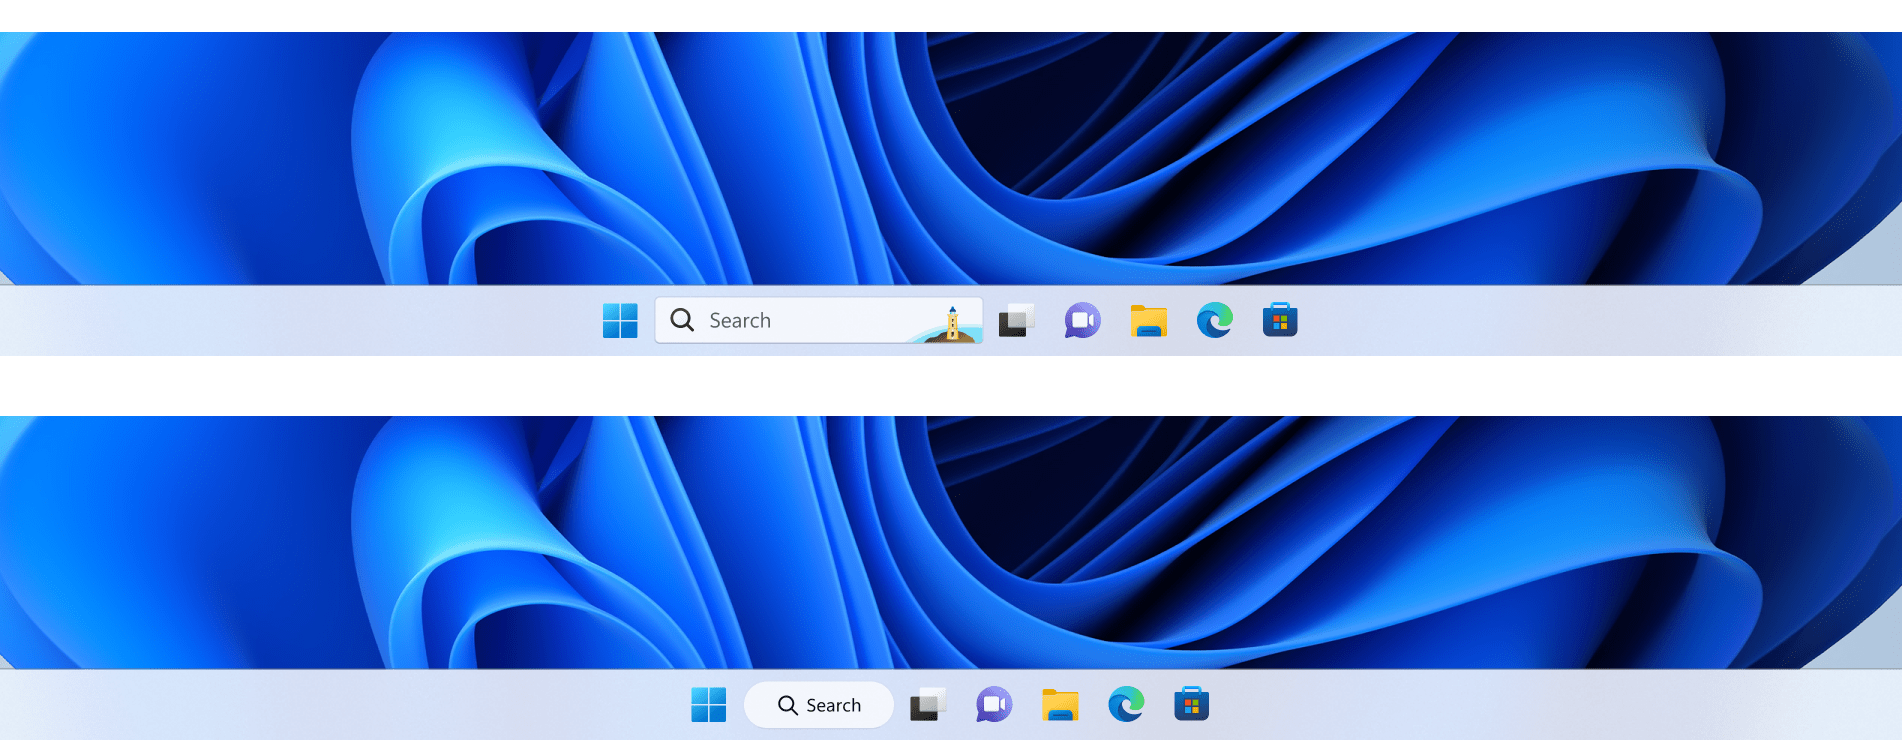 Example of the different treatments we are testing for the search aspect of the taskbar